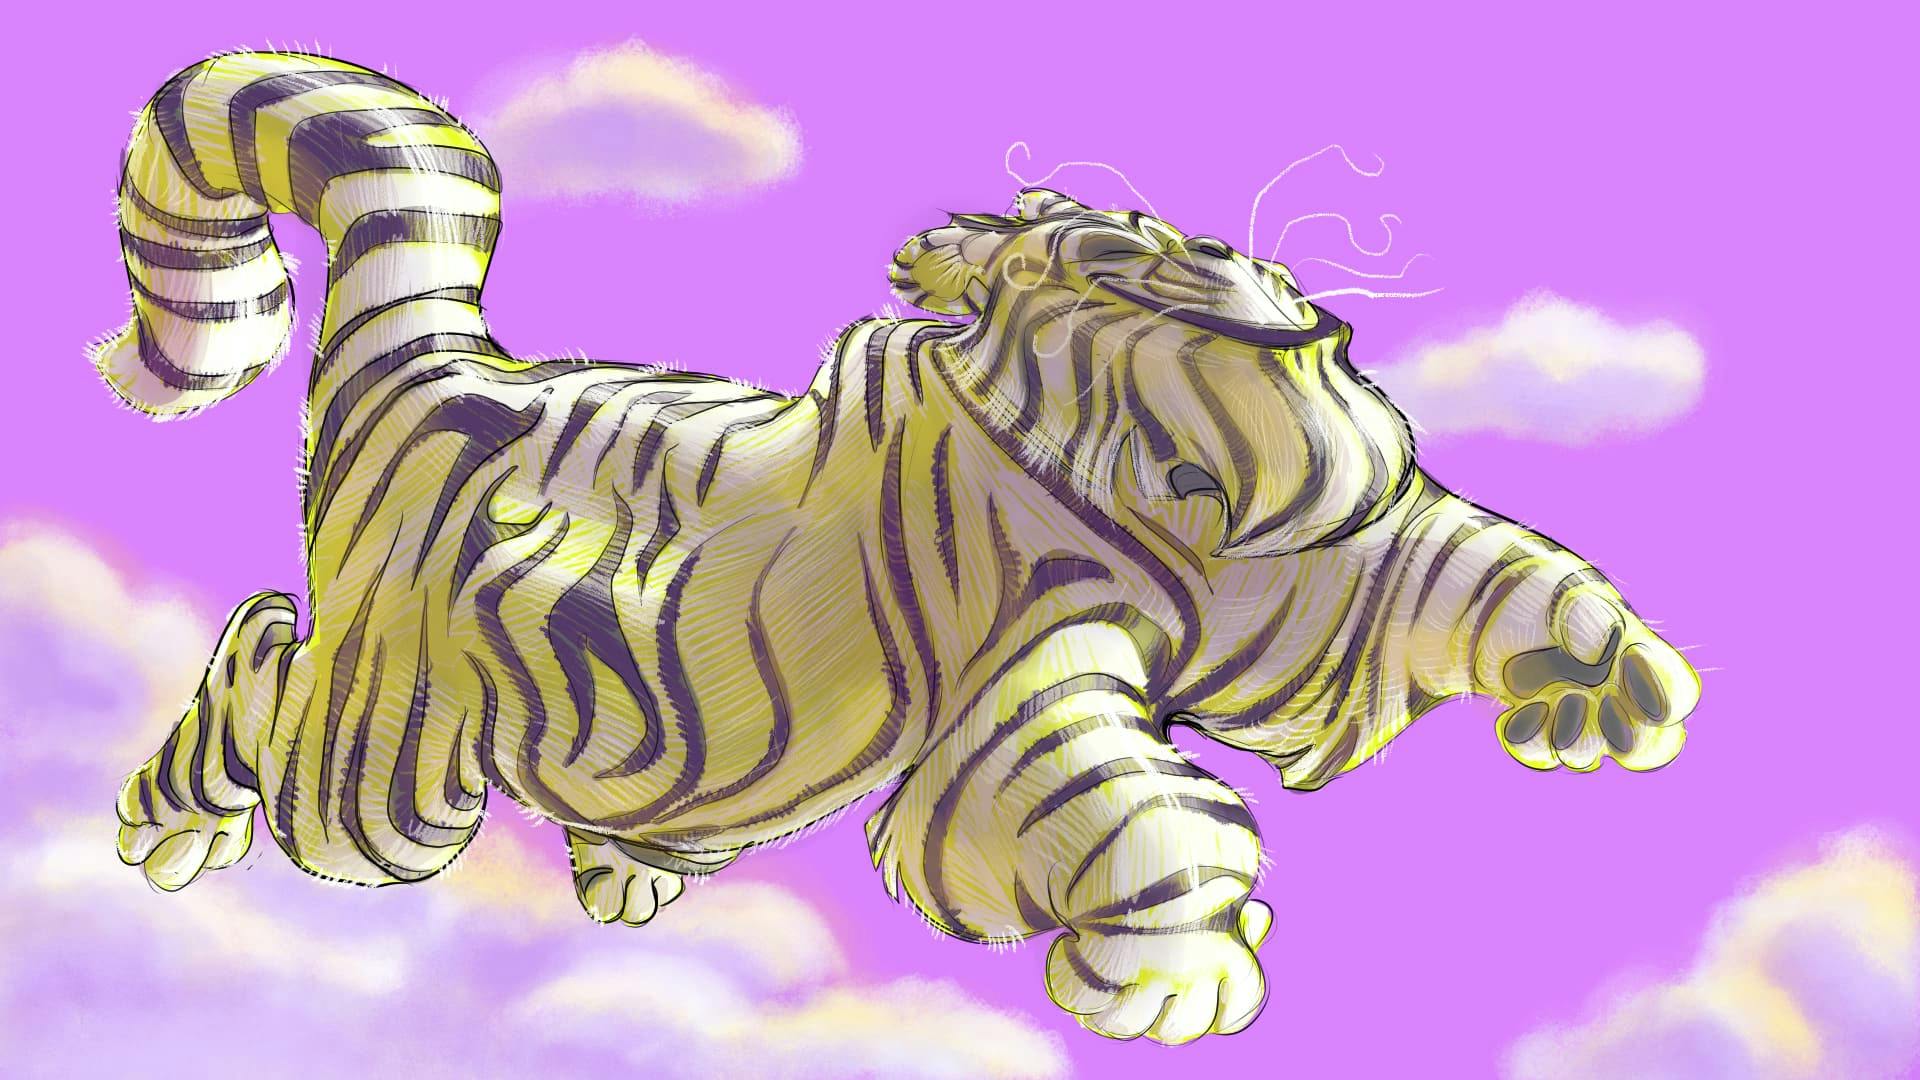 A flying tiger